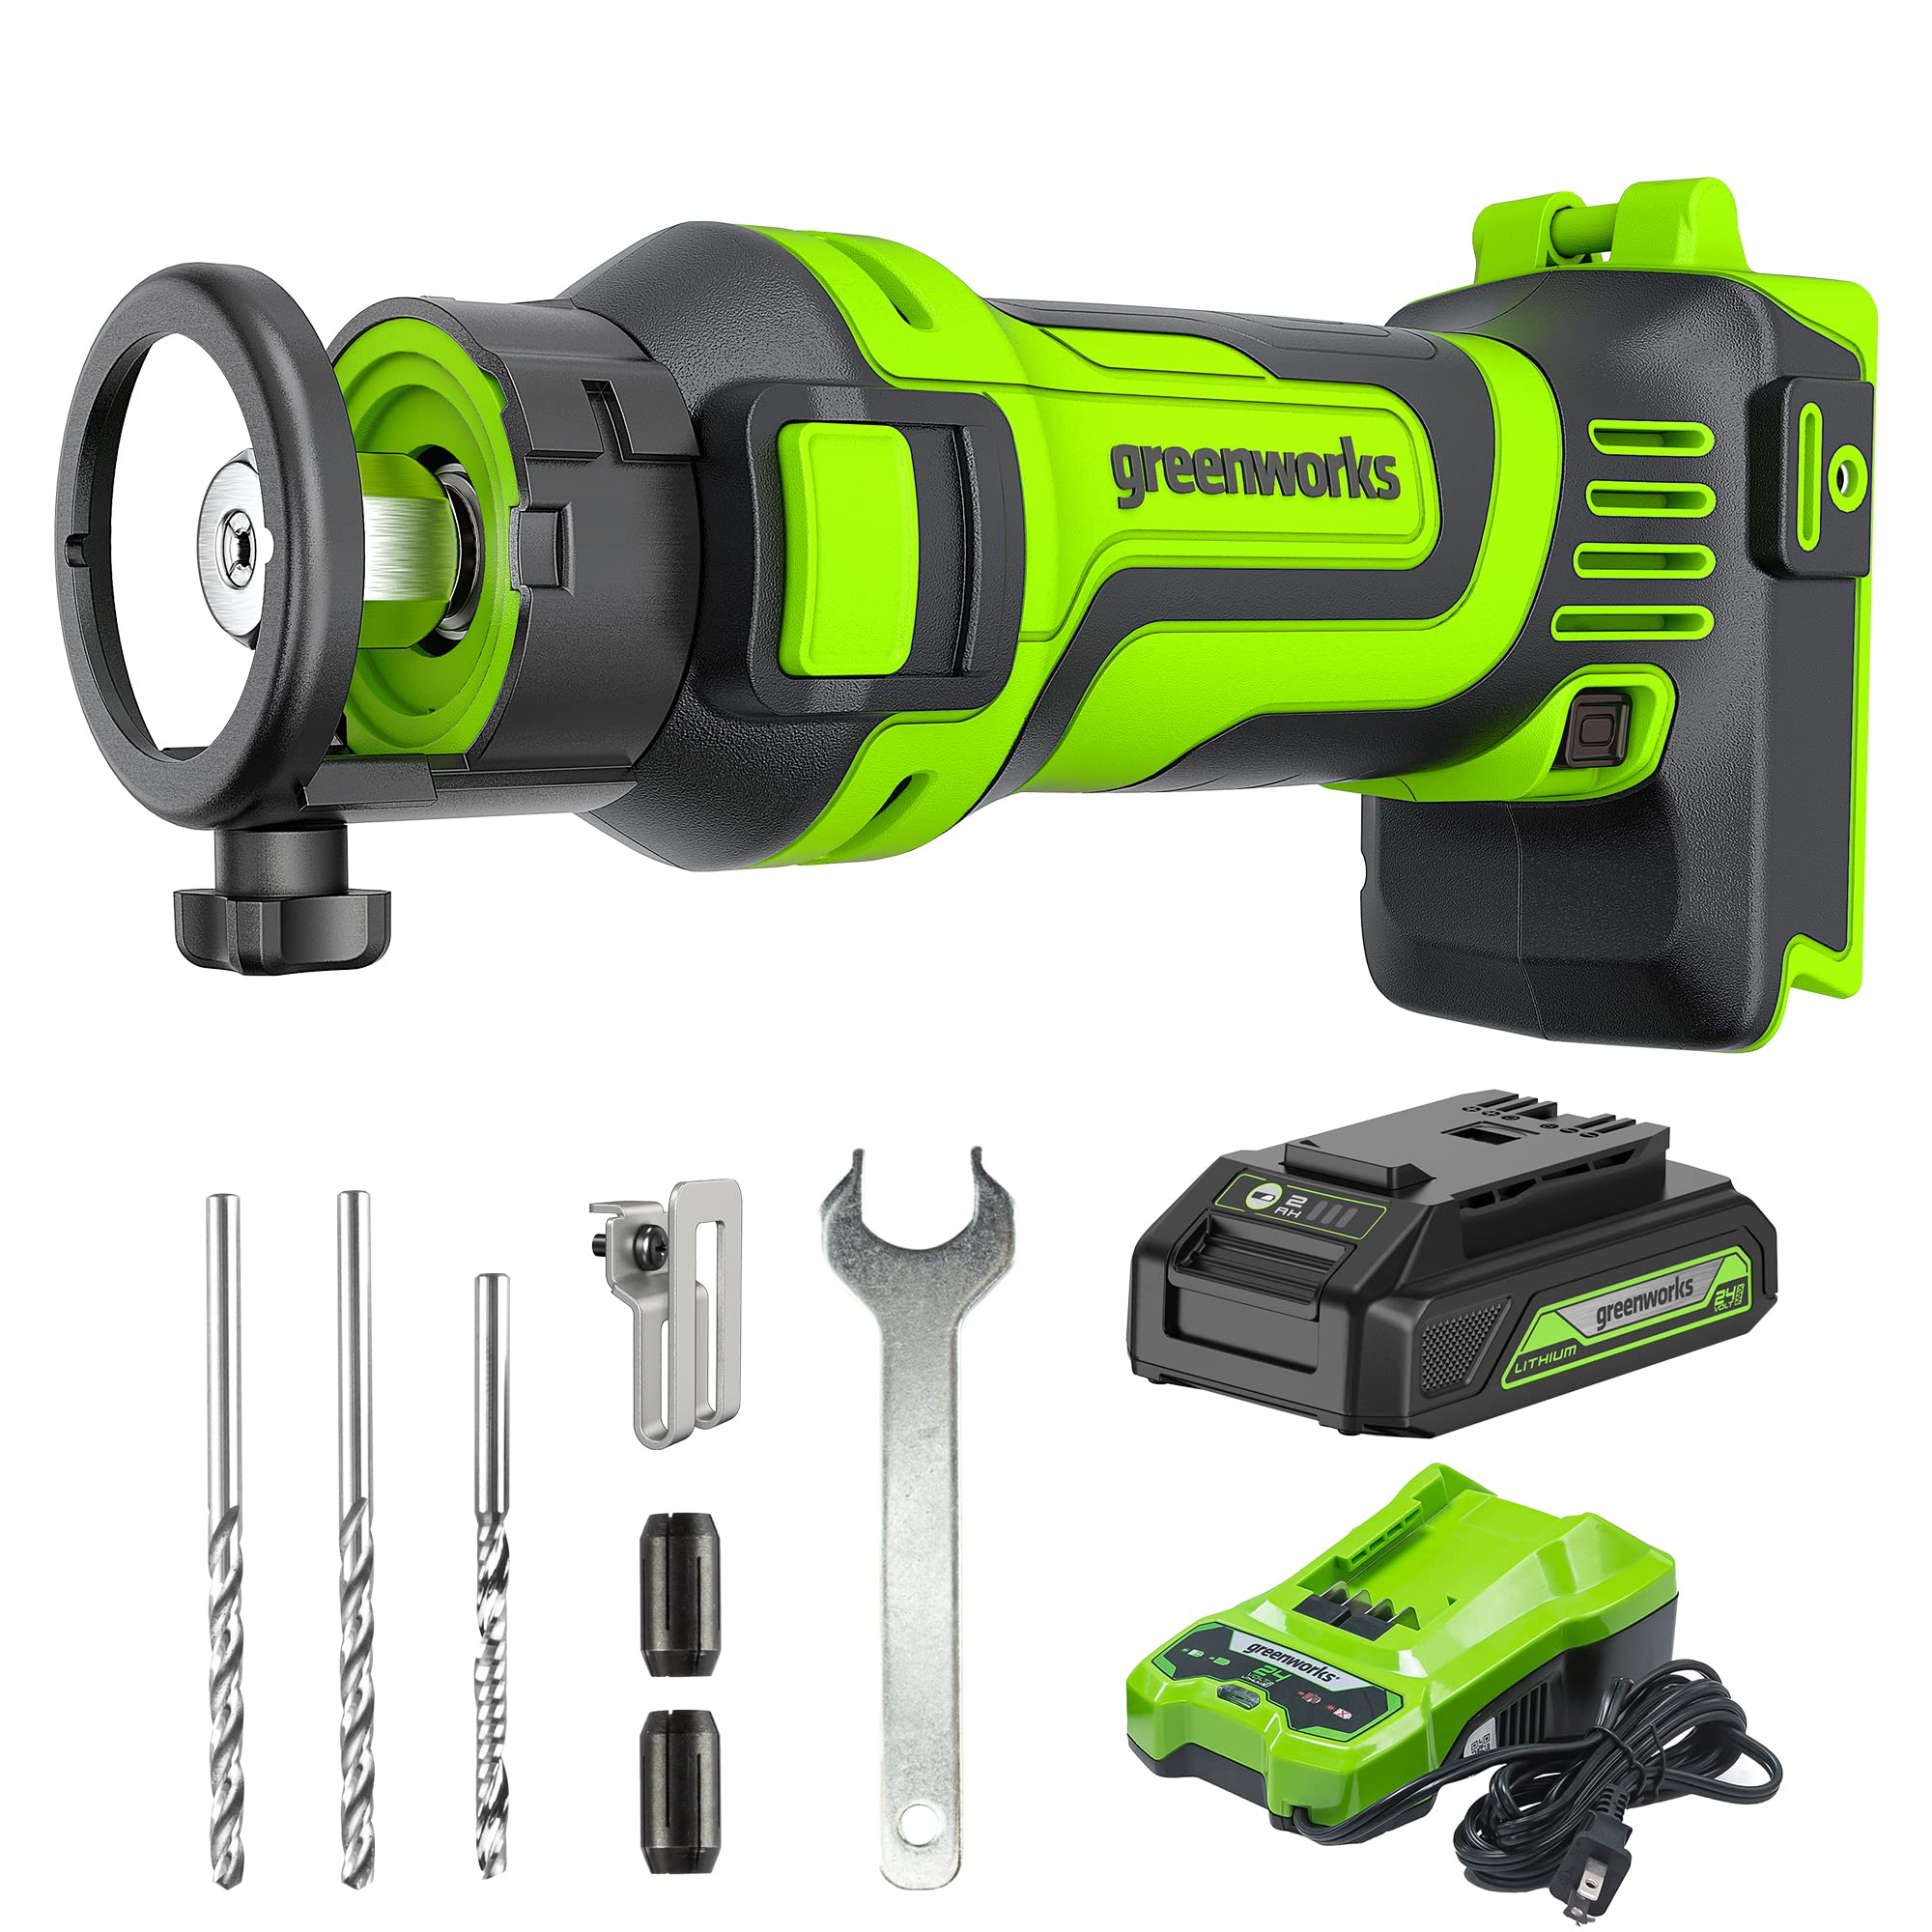 Greenworks 24v Speed Saw Rotary Cut Tool, 2Ah Battery and Charger Included - image 1 of 7